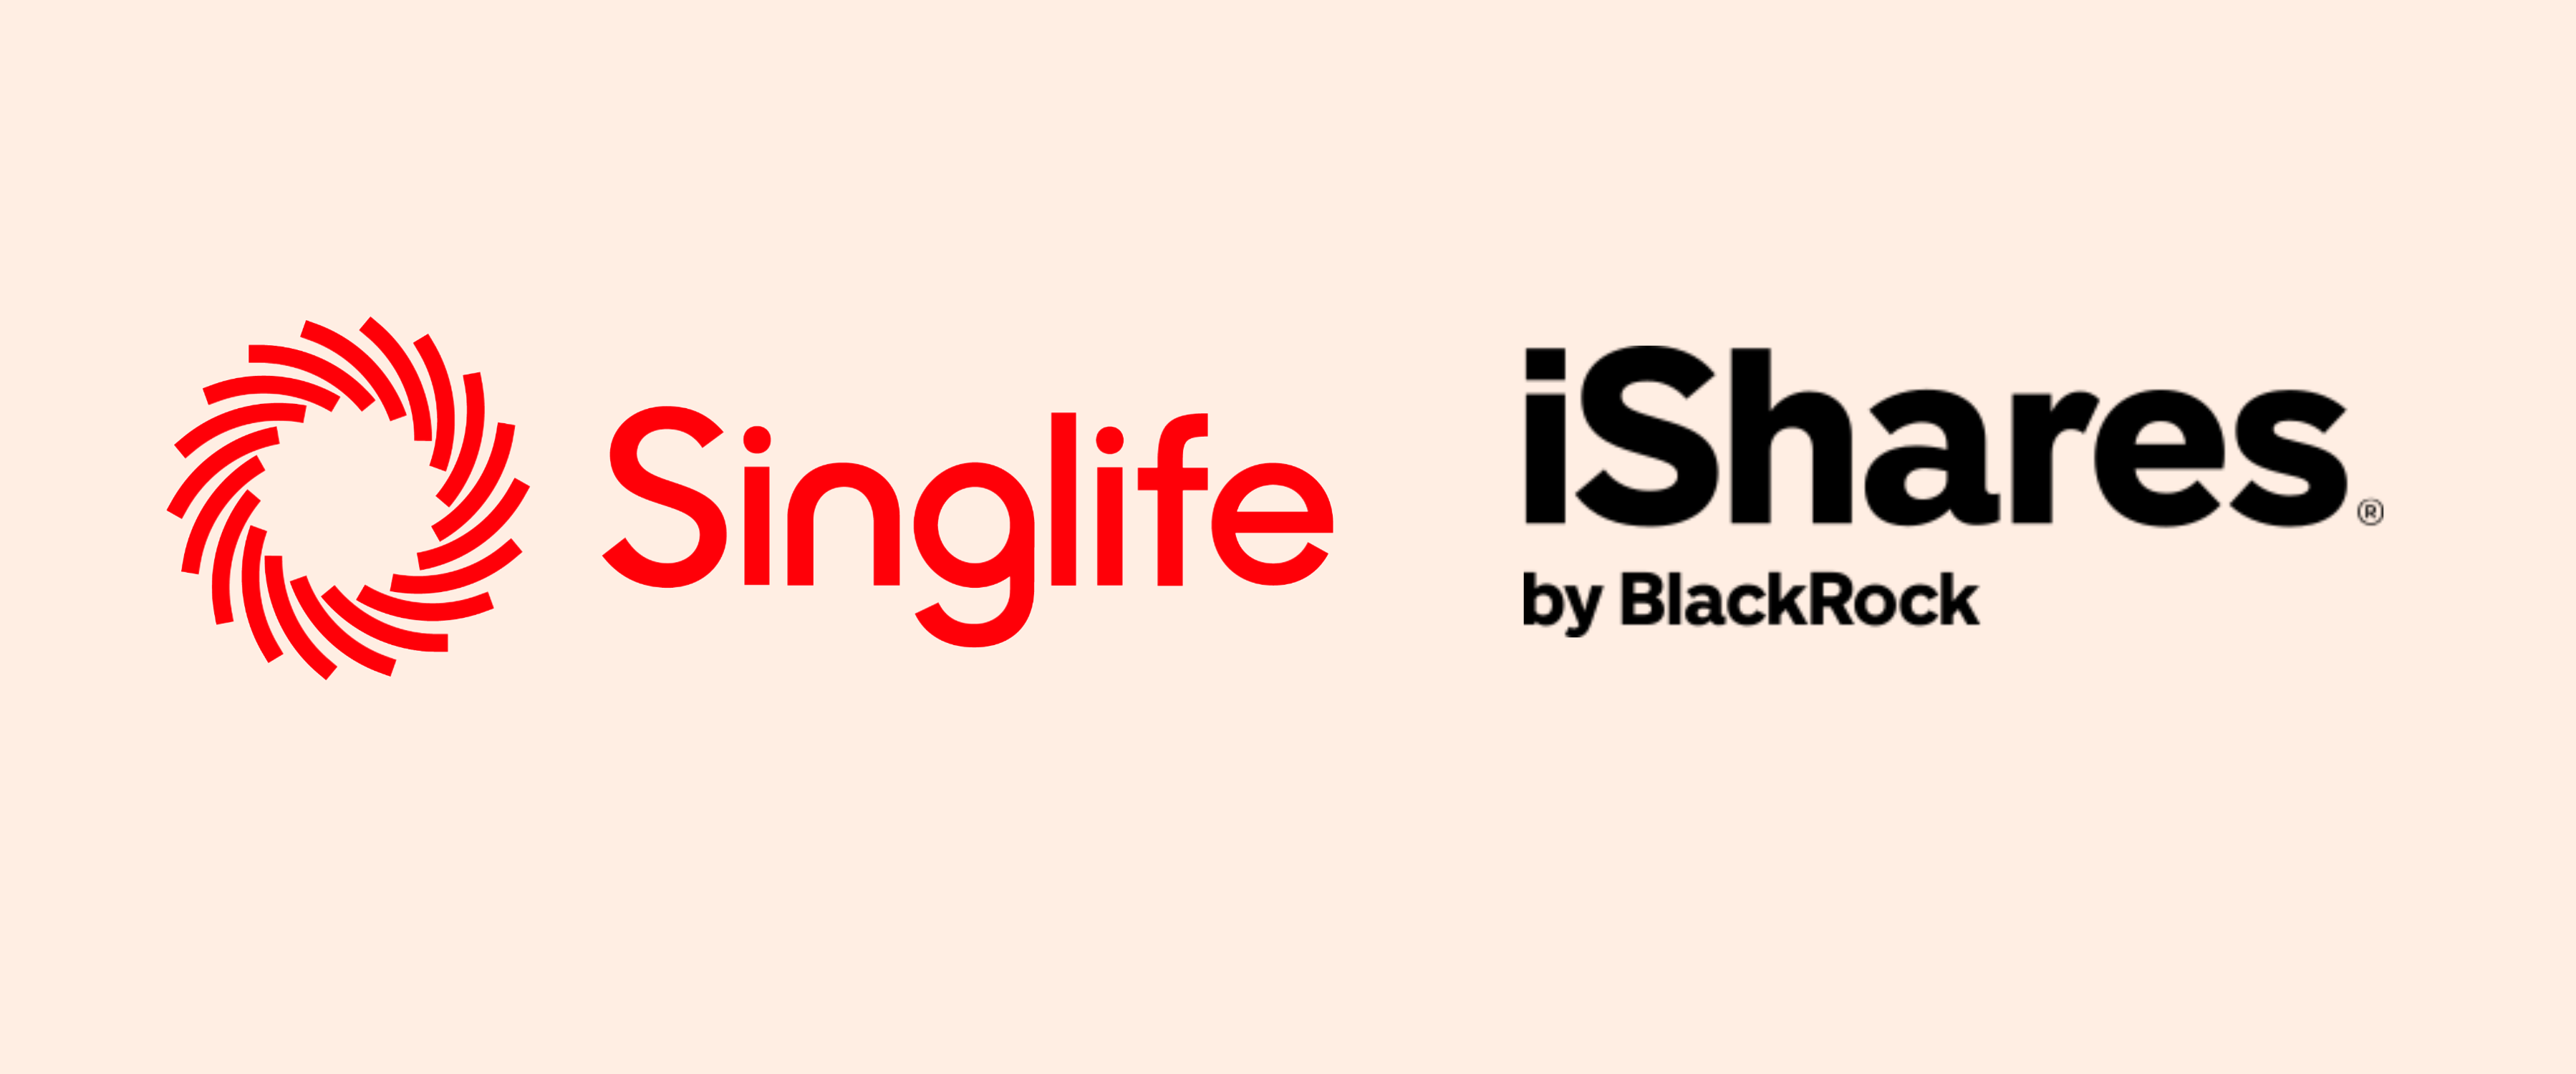 Image of Singlife and iShares by BlackRock